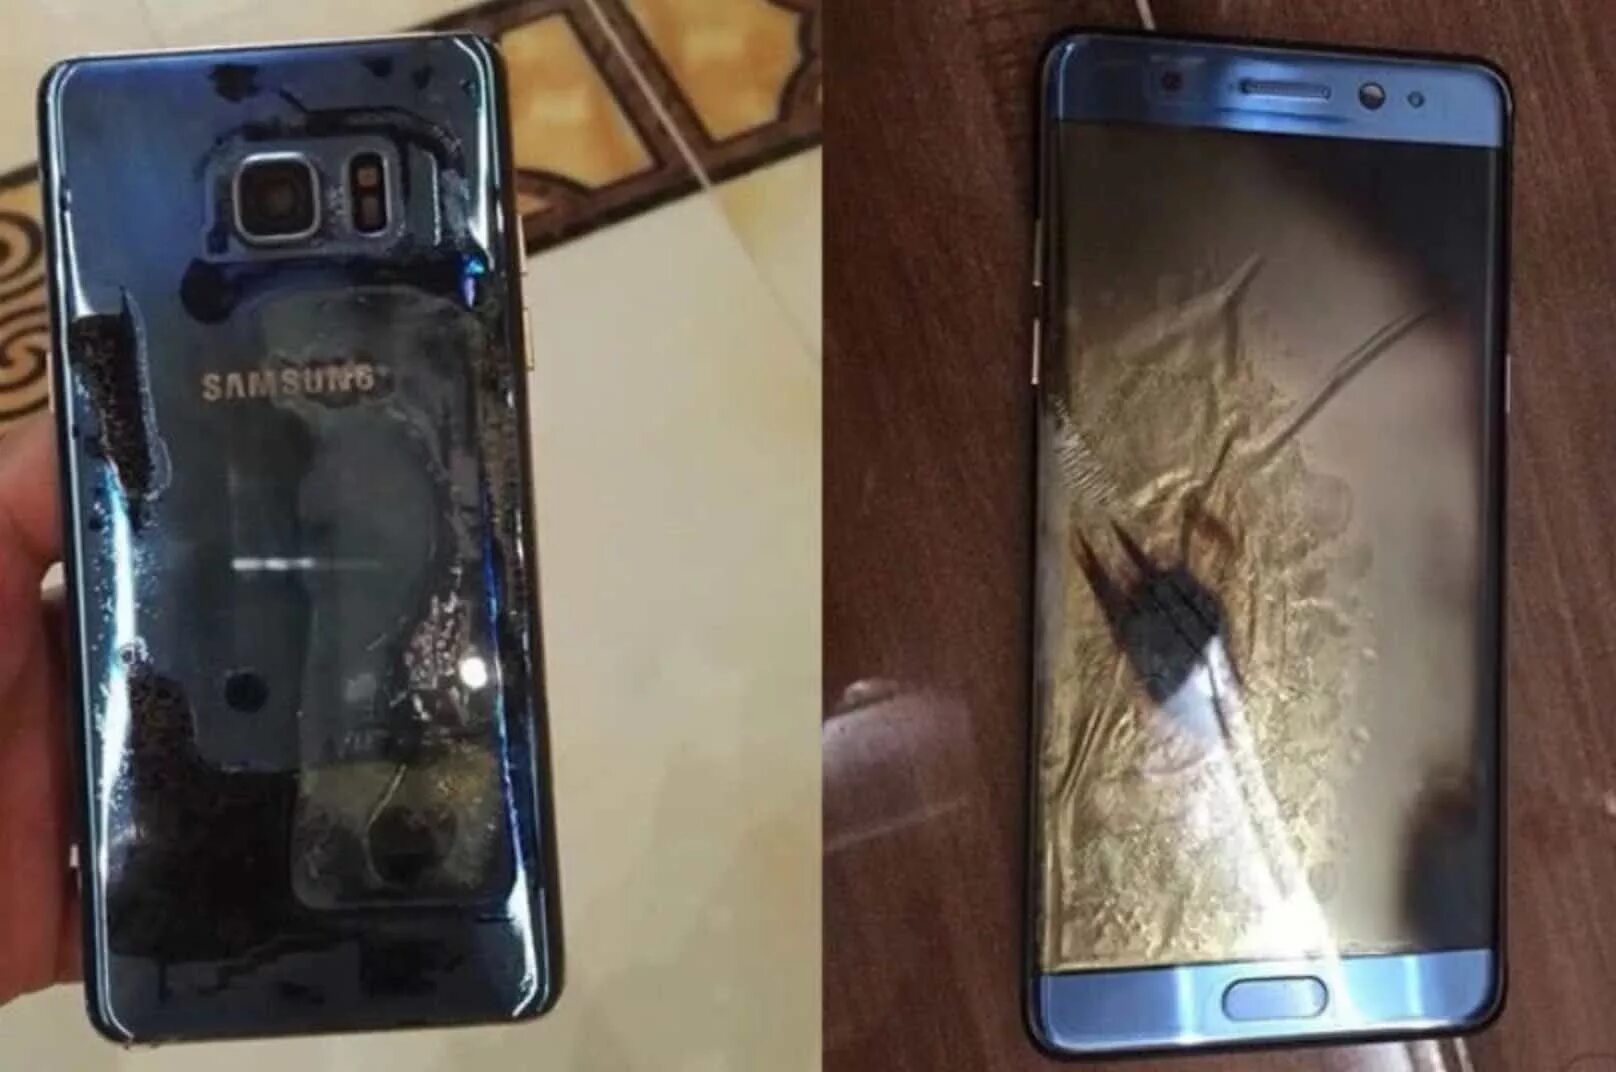 Samsung Note 7. Samsung Galaxy Note 7 взрывается. Samsung Galaxy Note 7 exploding. Самсунг ноут 7 взорвался.